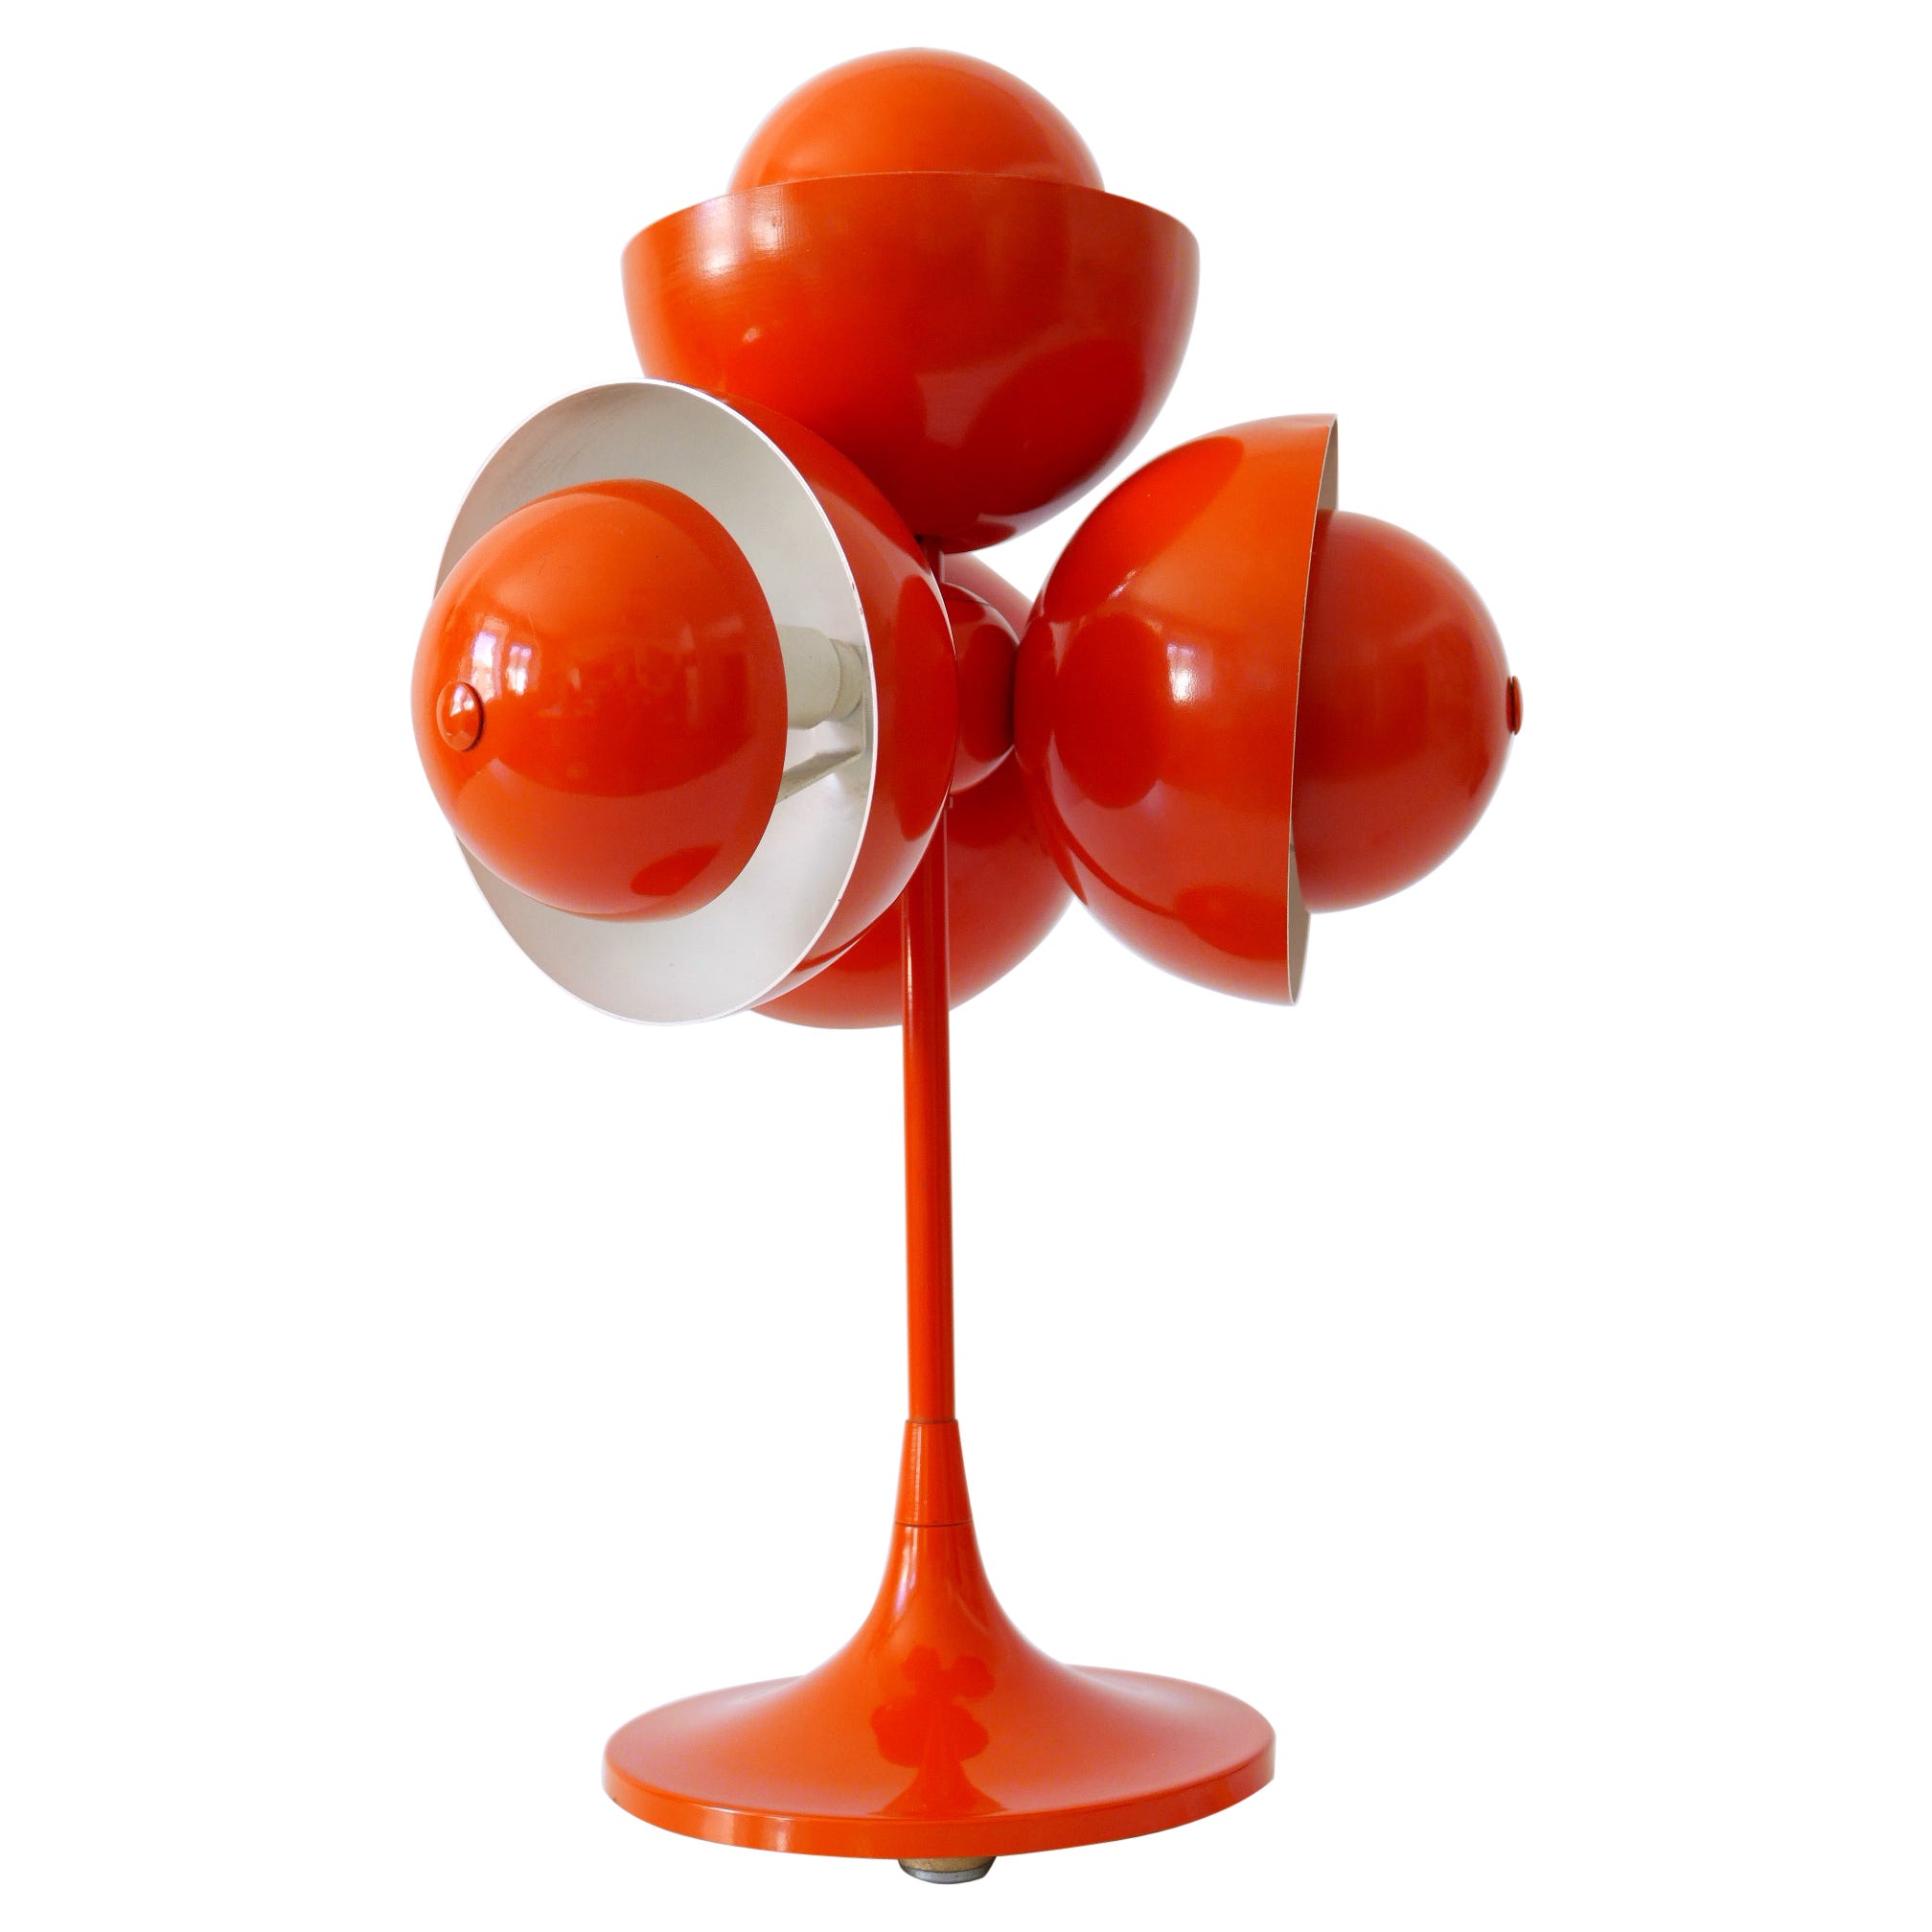 Exceptional & Lovely Mid-Century Modern Flowerpot Table Lamp, Germany, 1970s For Sale